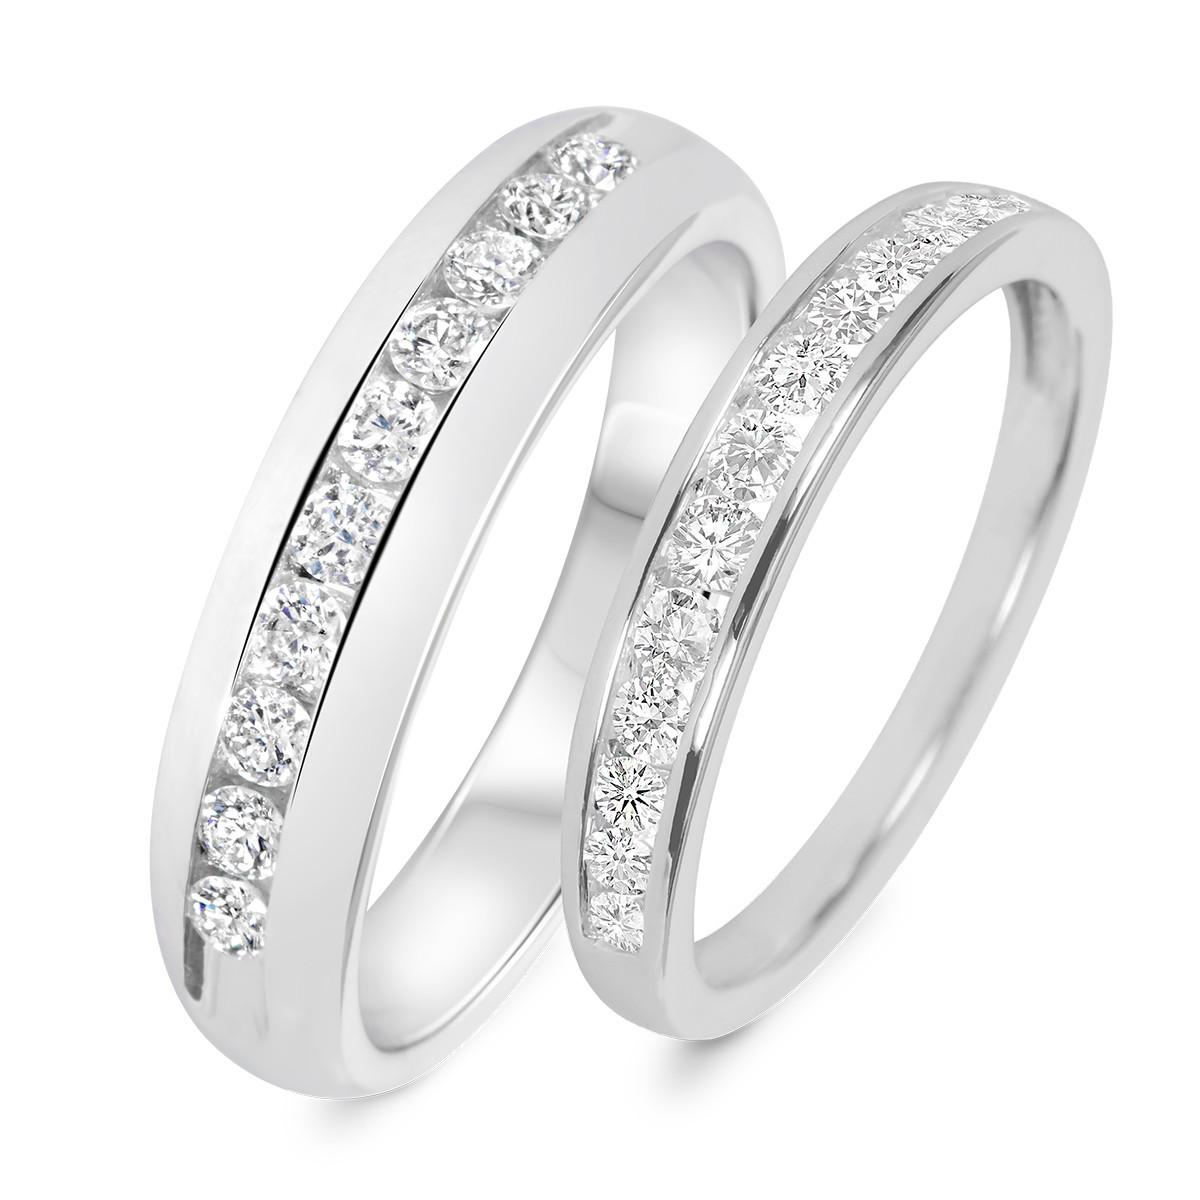 White Gold Wedding Ring Sets His And Hers
 7 8 Carat T W Diamond His And Hers Wedding Band Set 14K